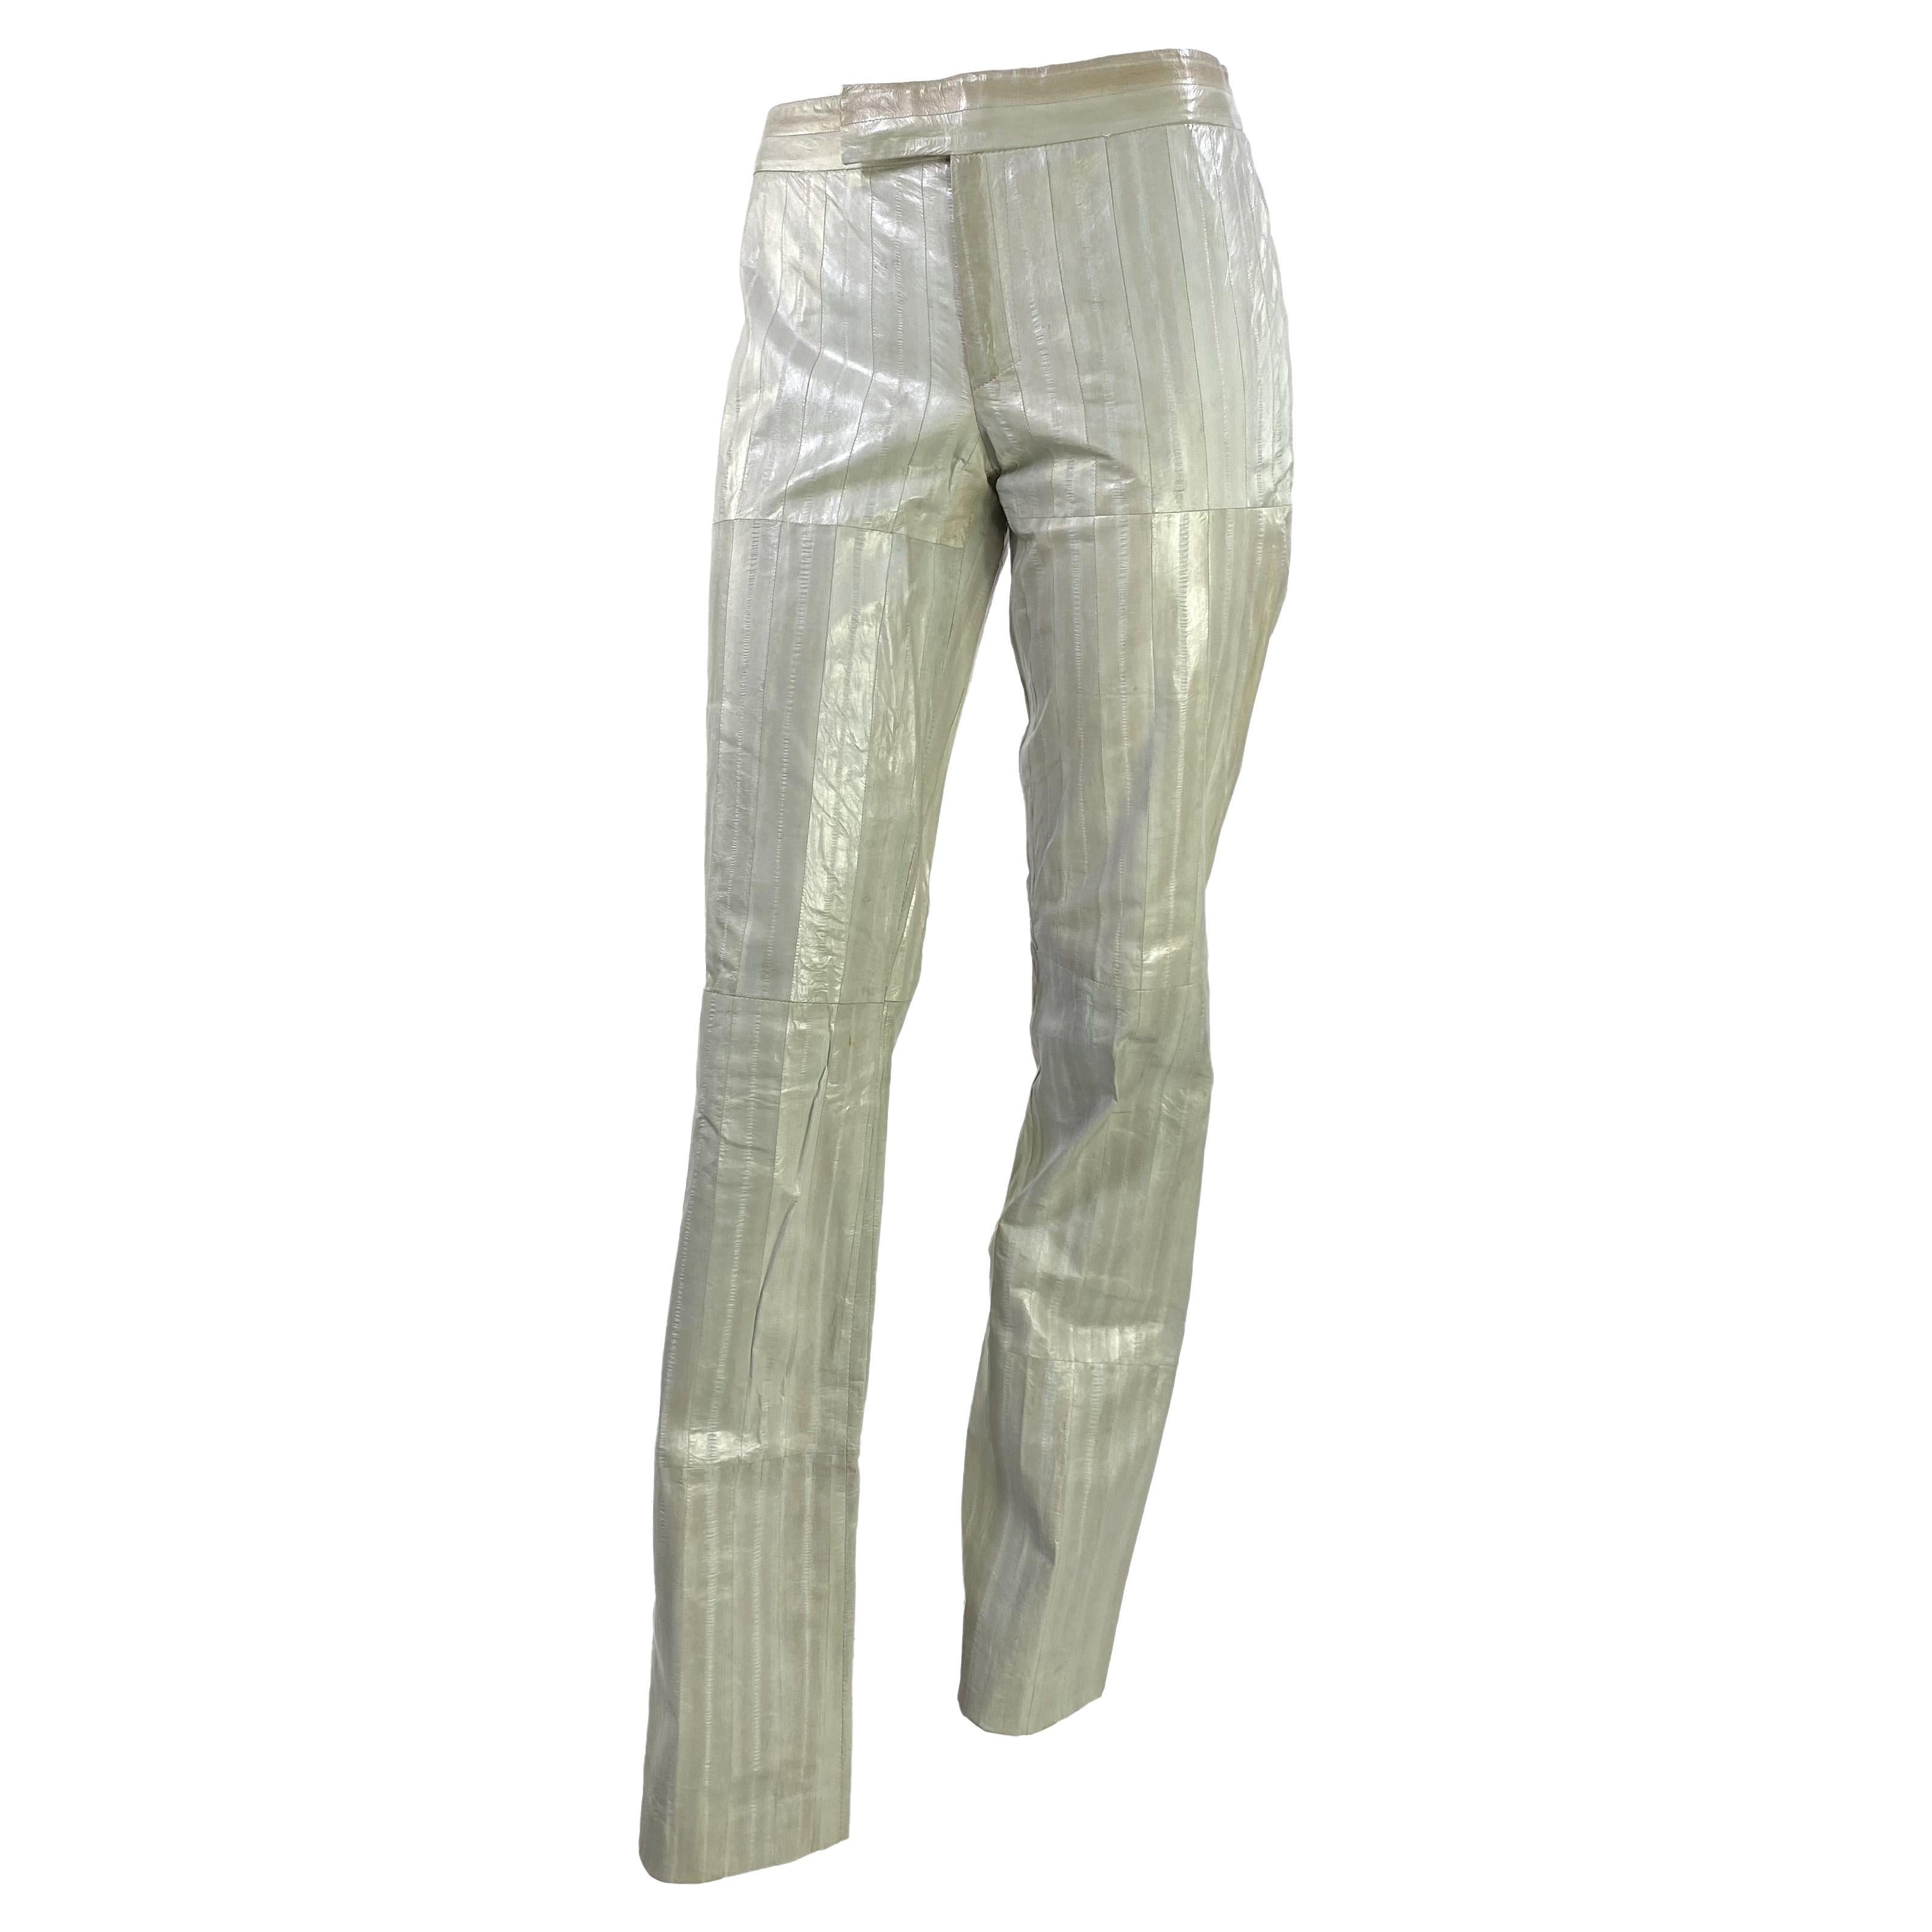 Early 2000s Gucci by Tom Ford Off White Eel Skin Leather Pants